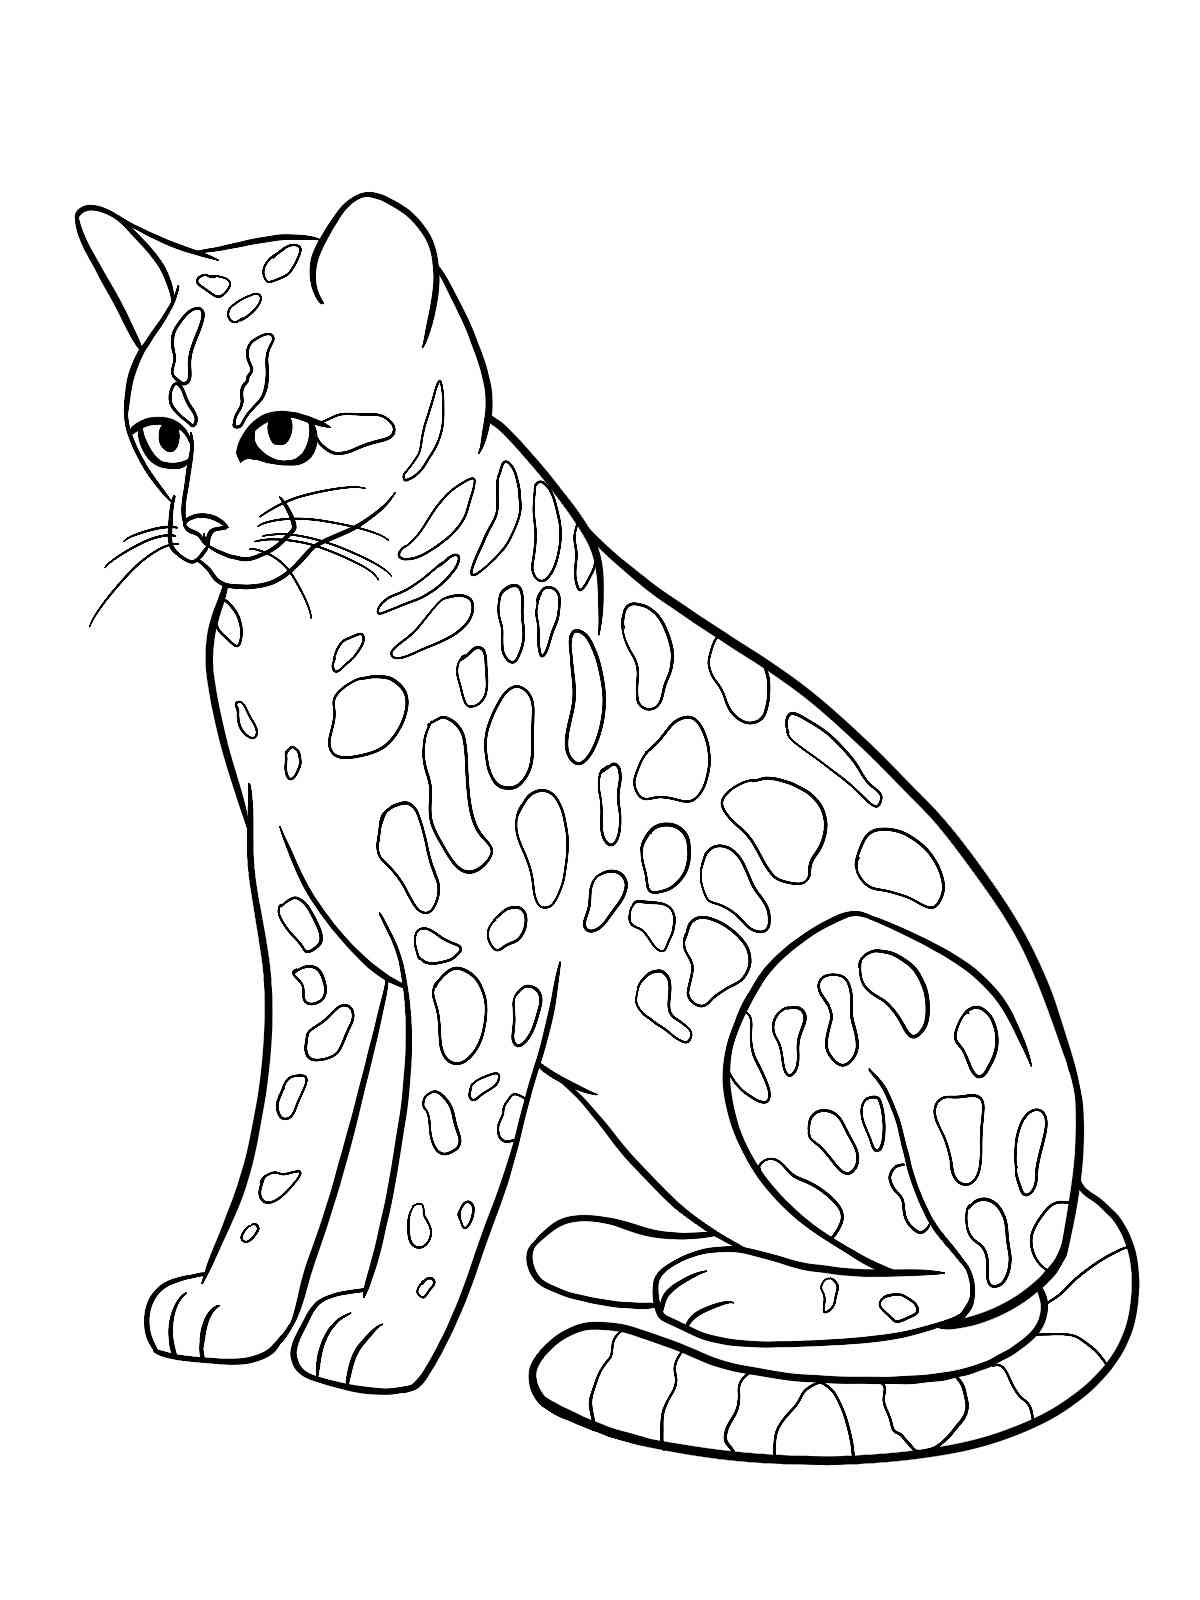 Ocelot Sitting coloring page